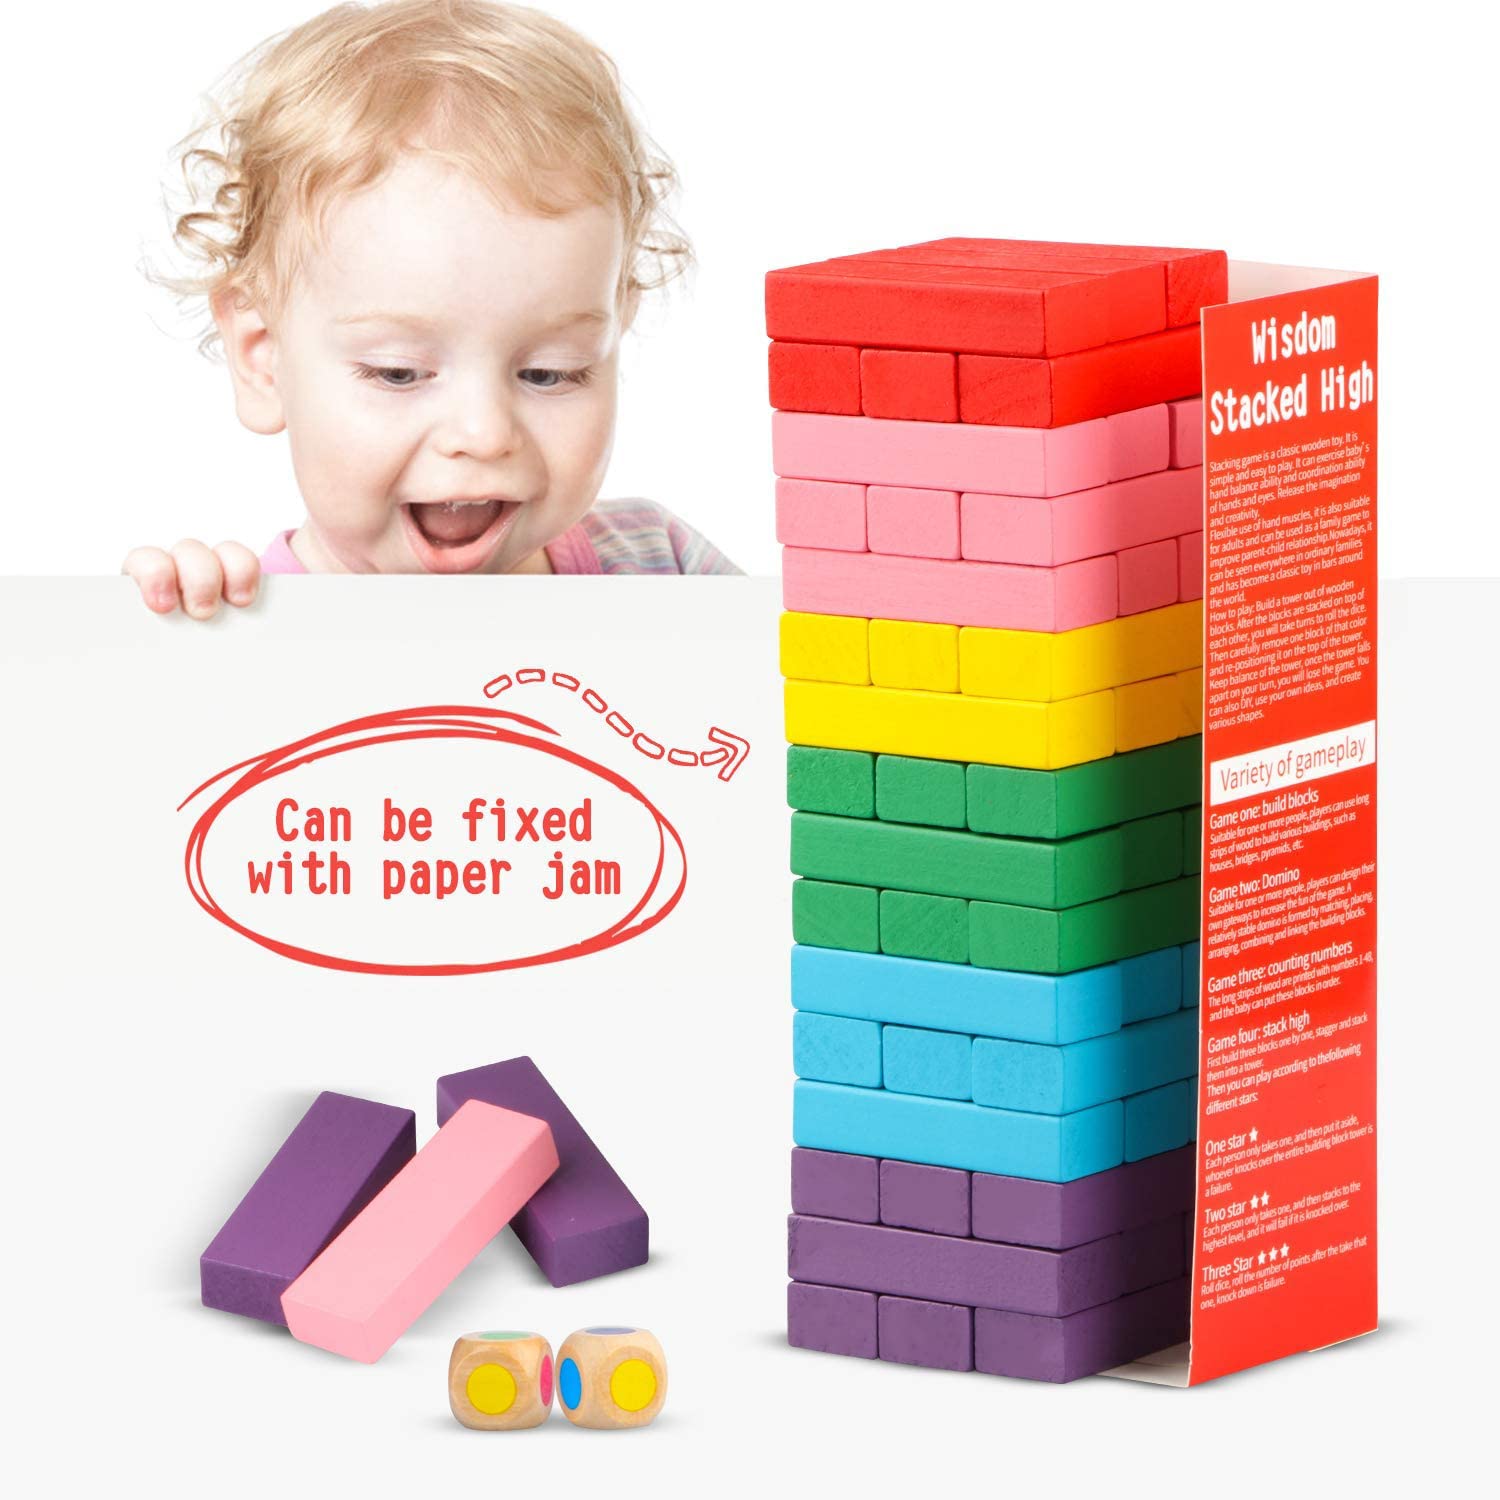 Canuan Wooden Blocks Stacking Games, 48PCS Tumbling Stacking Blocks Game for Kids and Families, Wood Colorful Balancing Blocks Montessori Toys for Kids with Storage Bag